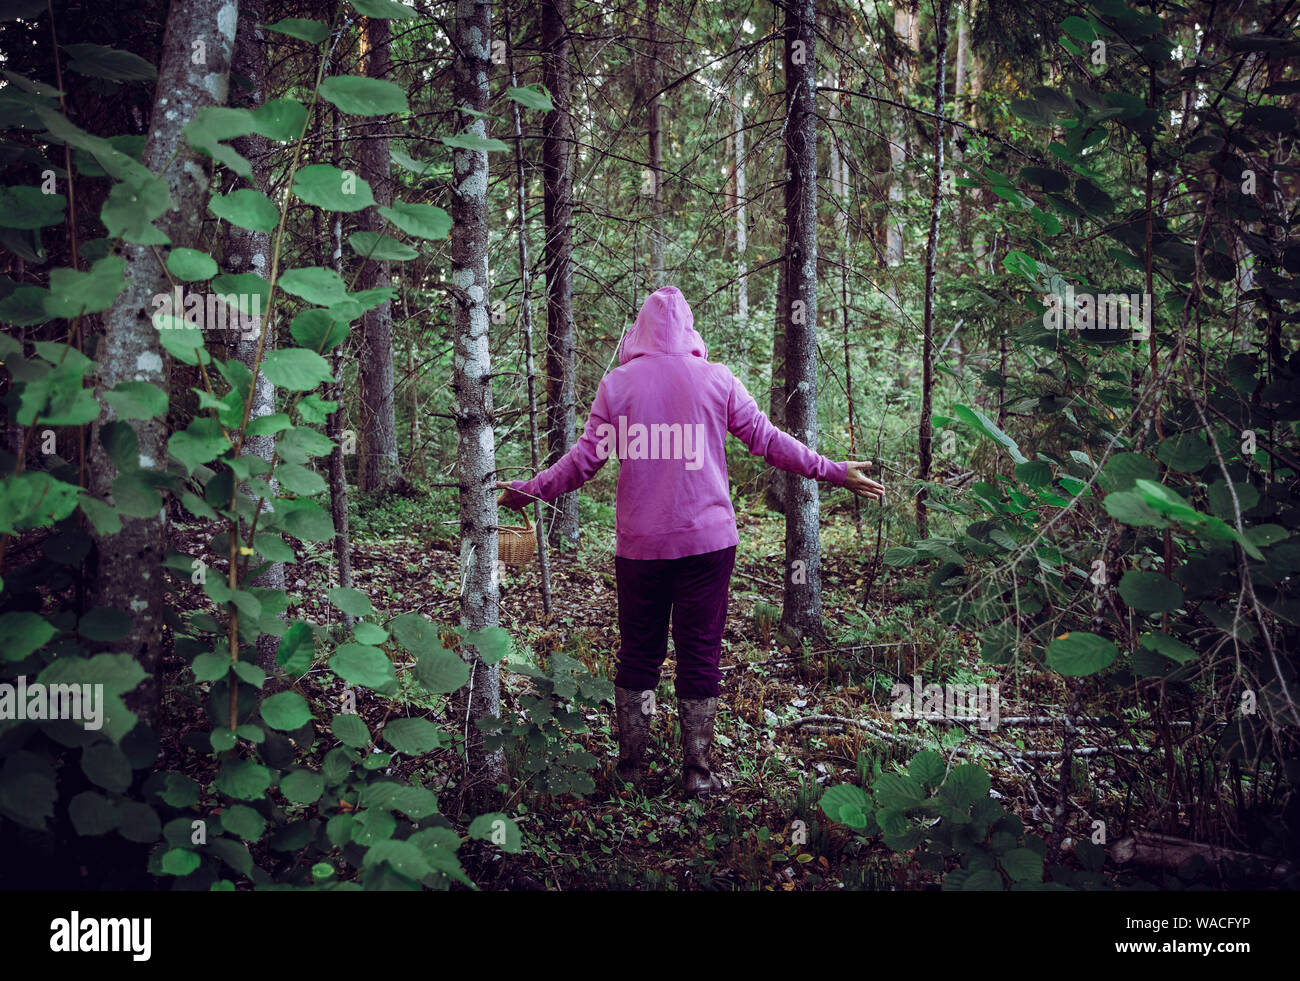 Confused person went to mushroom picking and got lost in the forest, disoriented scared and confused, northern Europe. Person lost in nature concept. Stock Photo